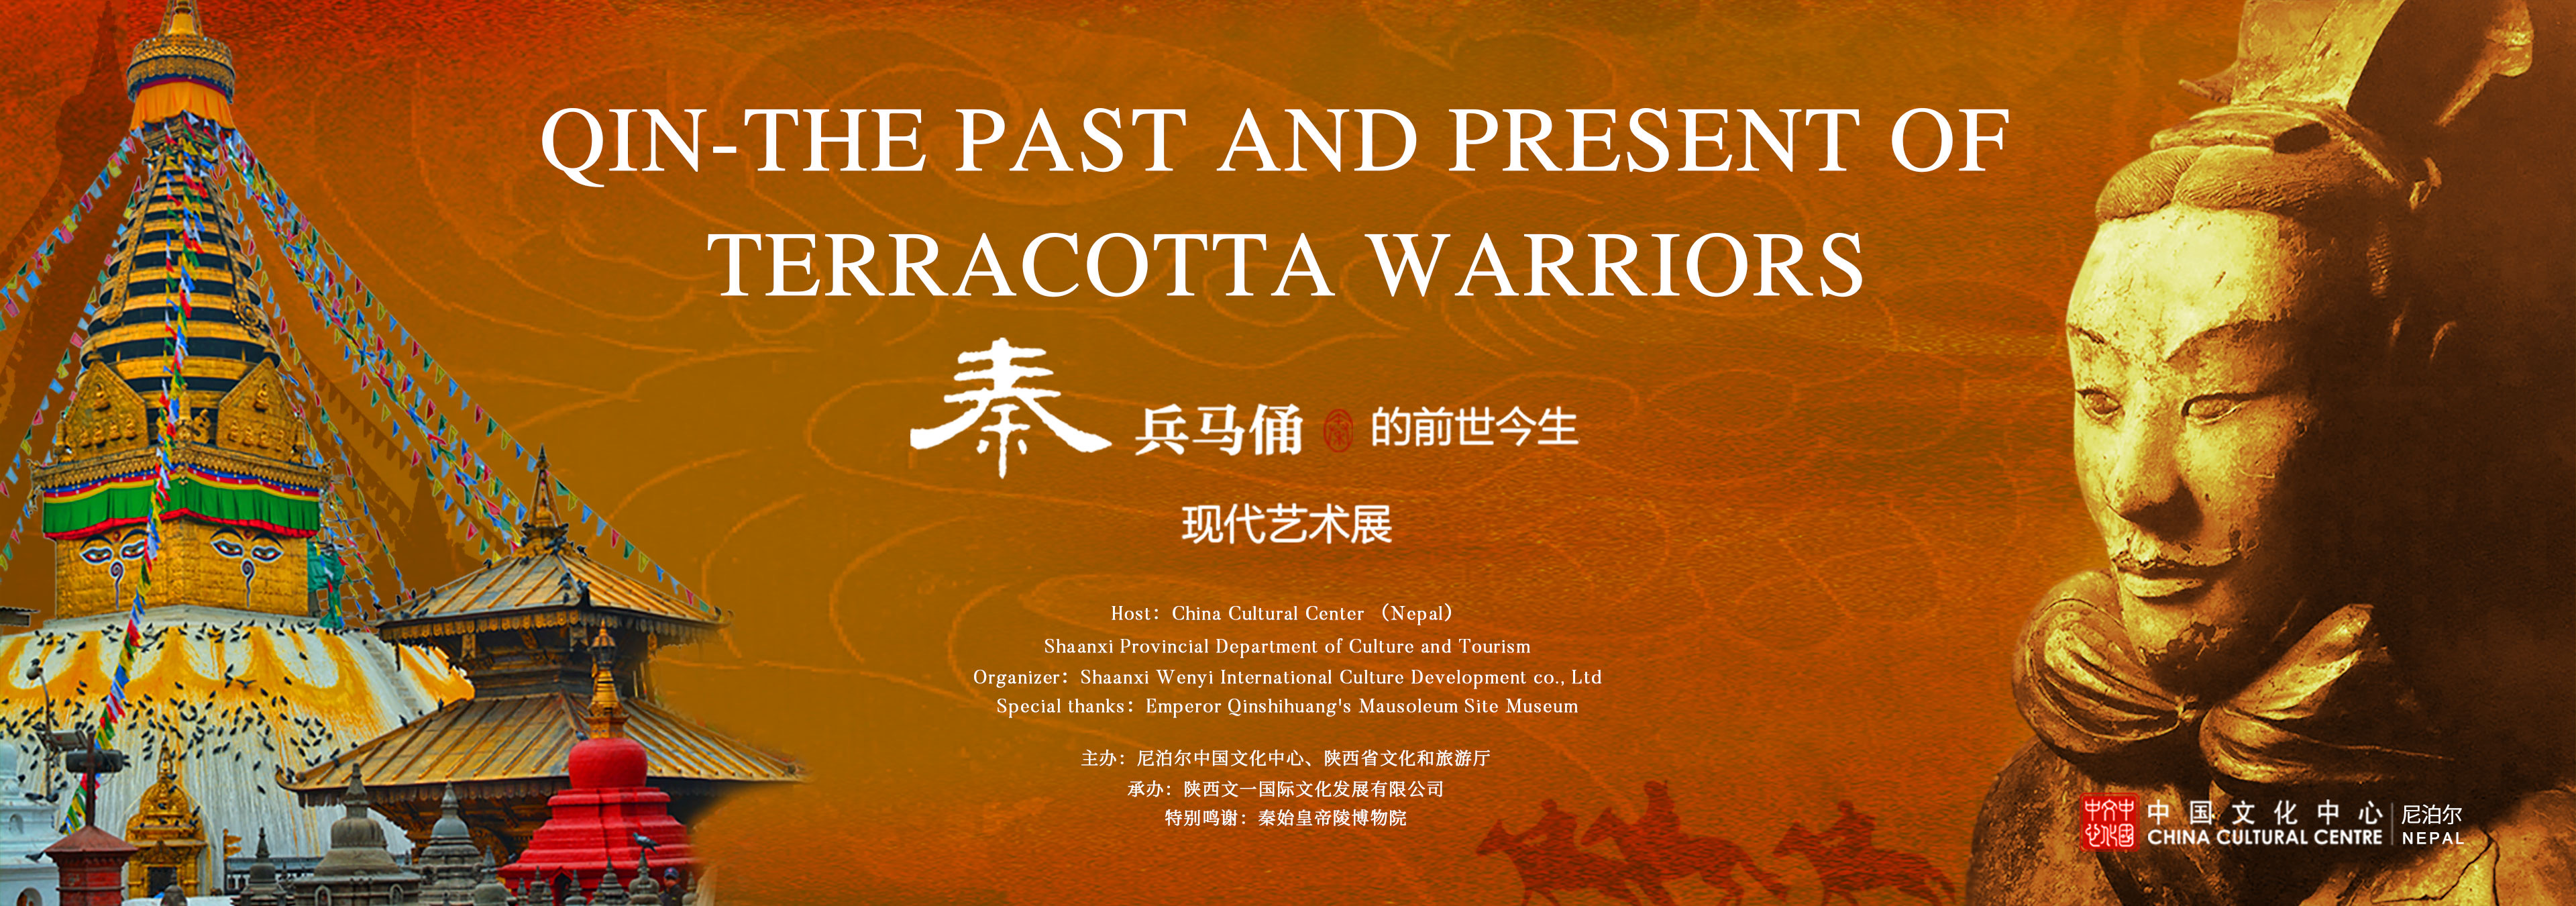 nepali-audience-enchanted-from-online-exhibition-on-terracotta-warriors